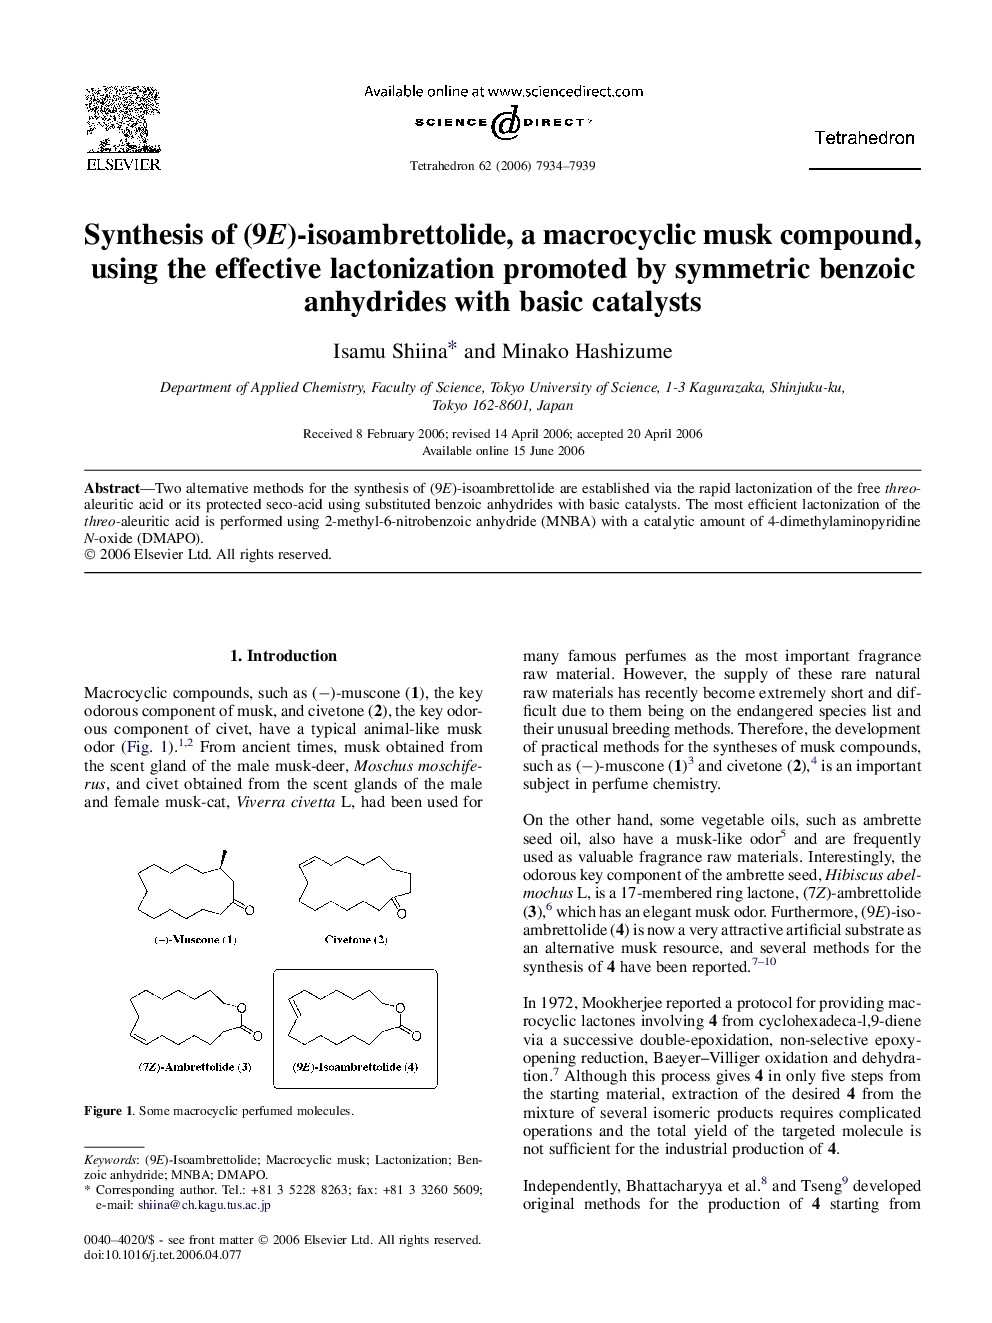 Synthesis of (9E)-isoambrettolide, a macrocyclic musk compound, using the effective lactonization promoted by symmetric benzoic anhydrides with basic catalysts